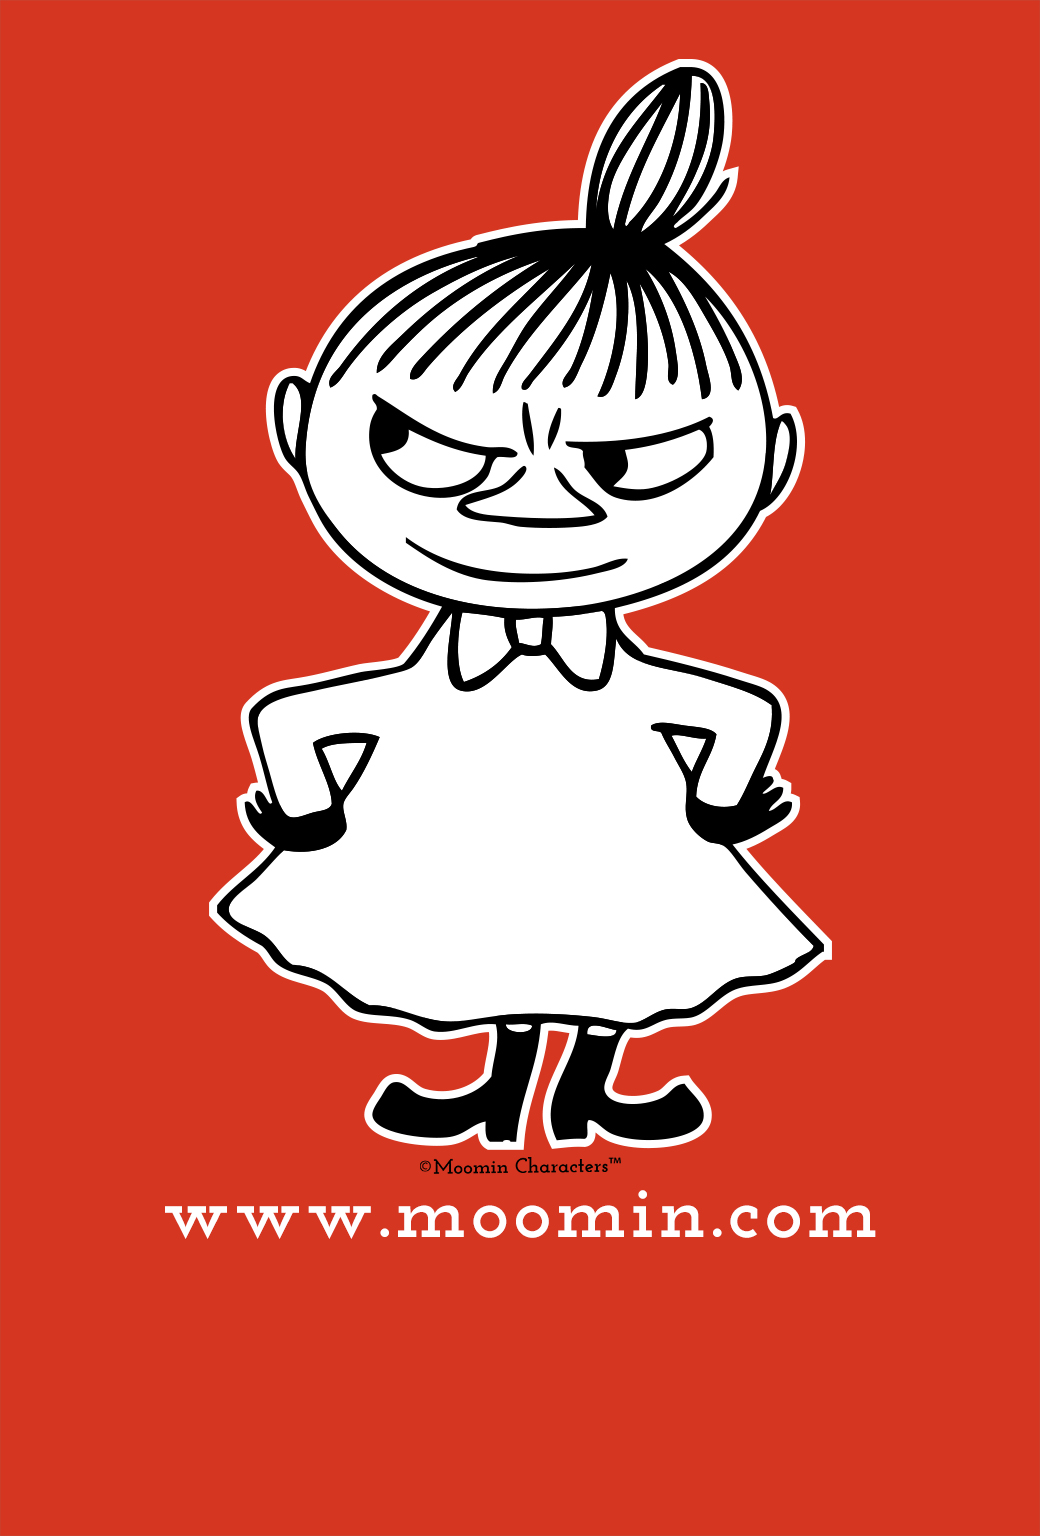 Moomin Wallpaper April Edition Featuring Little My Moomin